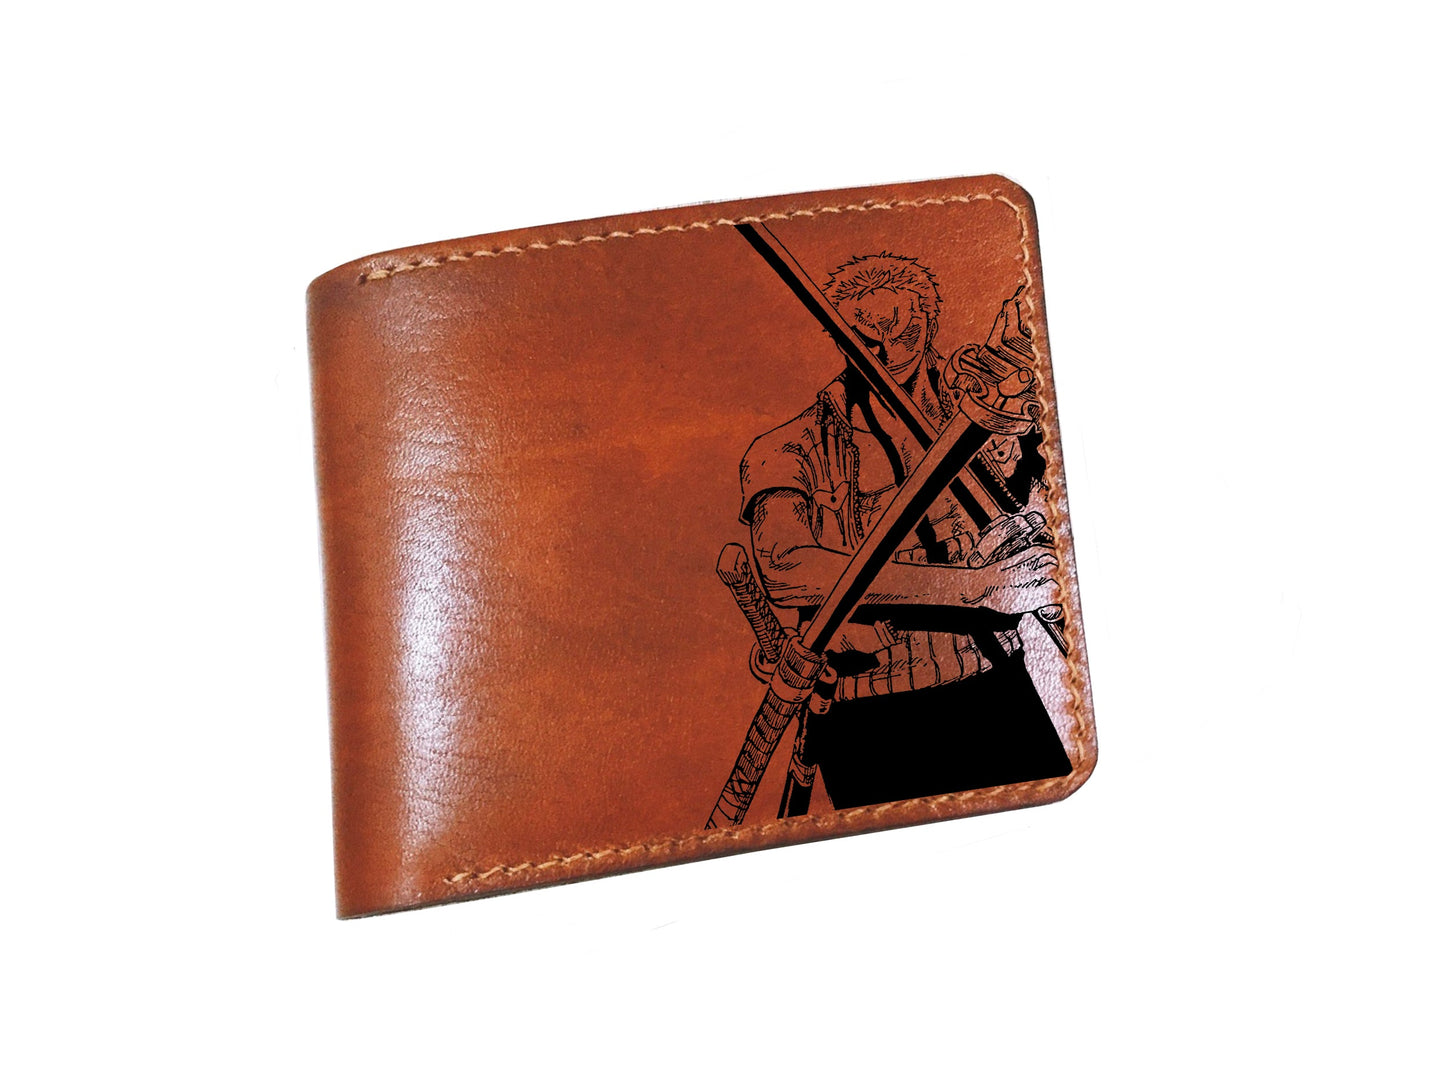 Mayan Corner - Whitebeard pirate leather wallet, bifold men's wallet, custom One piece leather gift for fan collection, leather anniversary gifts